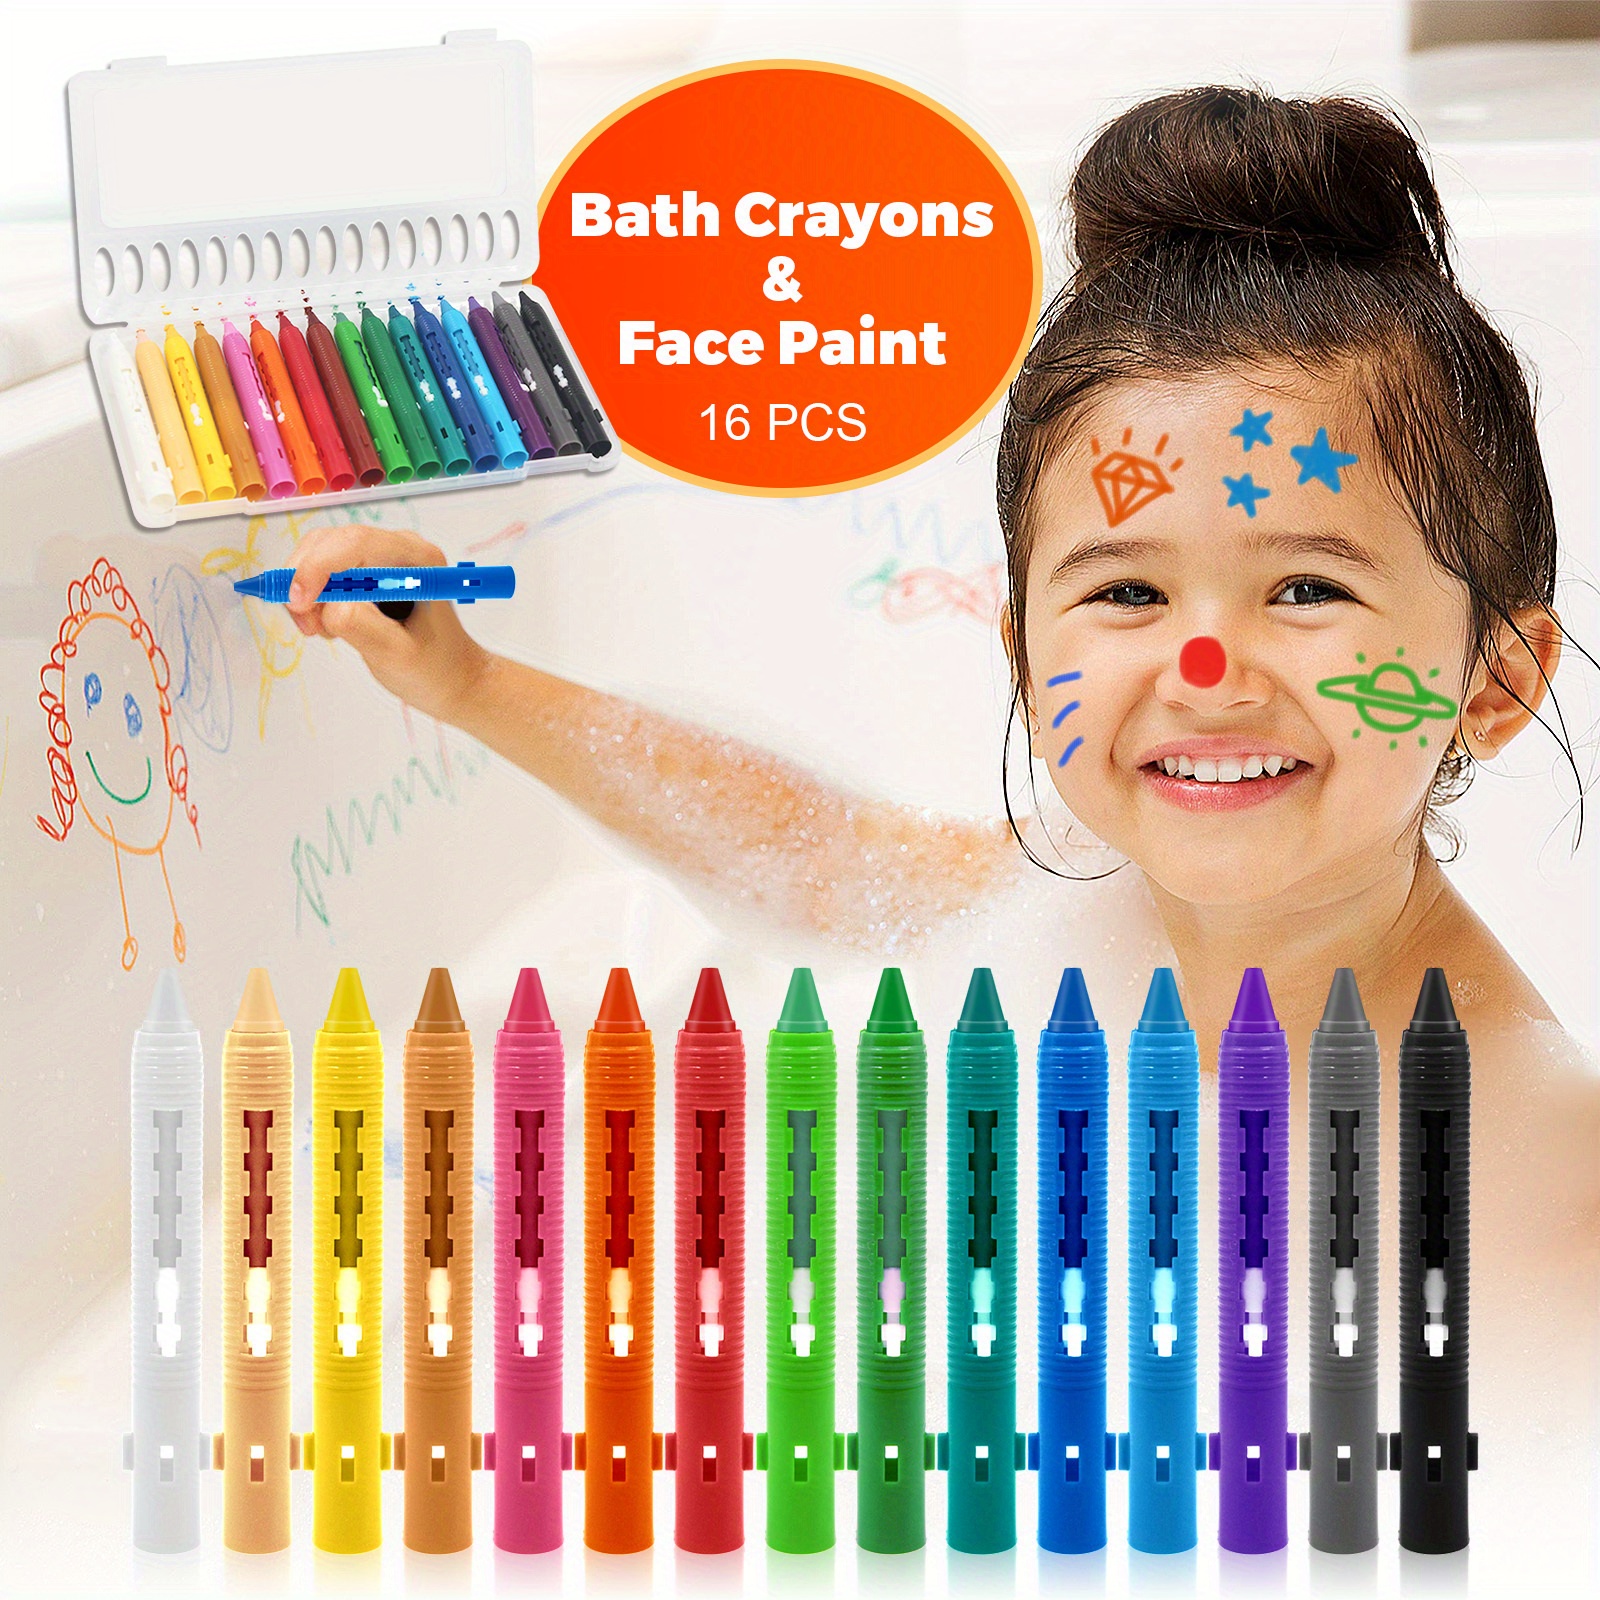 Peachy Keen Crafts Bath Crayons for Kids: Non-Toxic Crayons with Storage  Basket, Eraser Sponge, Adheres to Shower Wall - Bathtub Crayons to Draw and